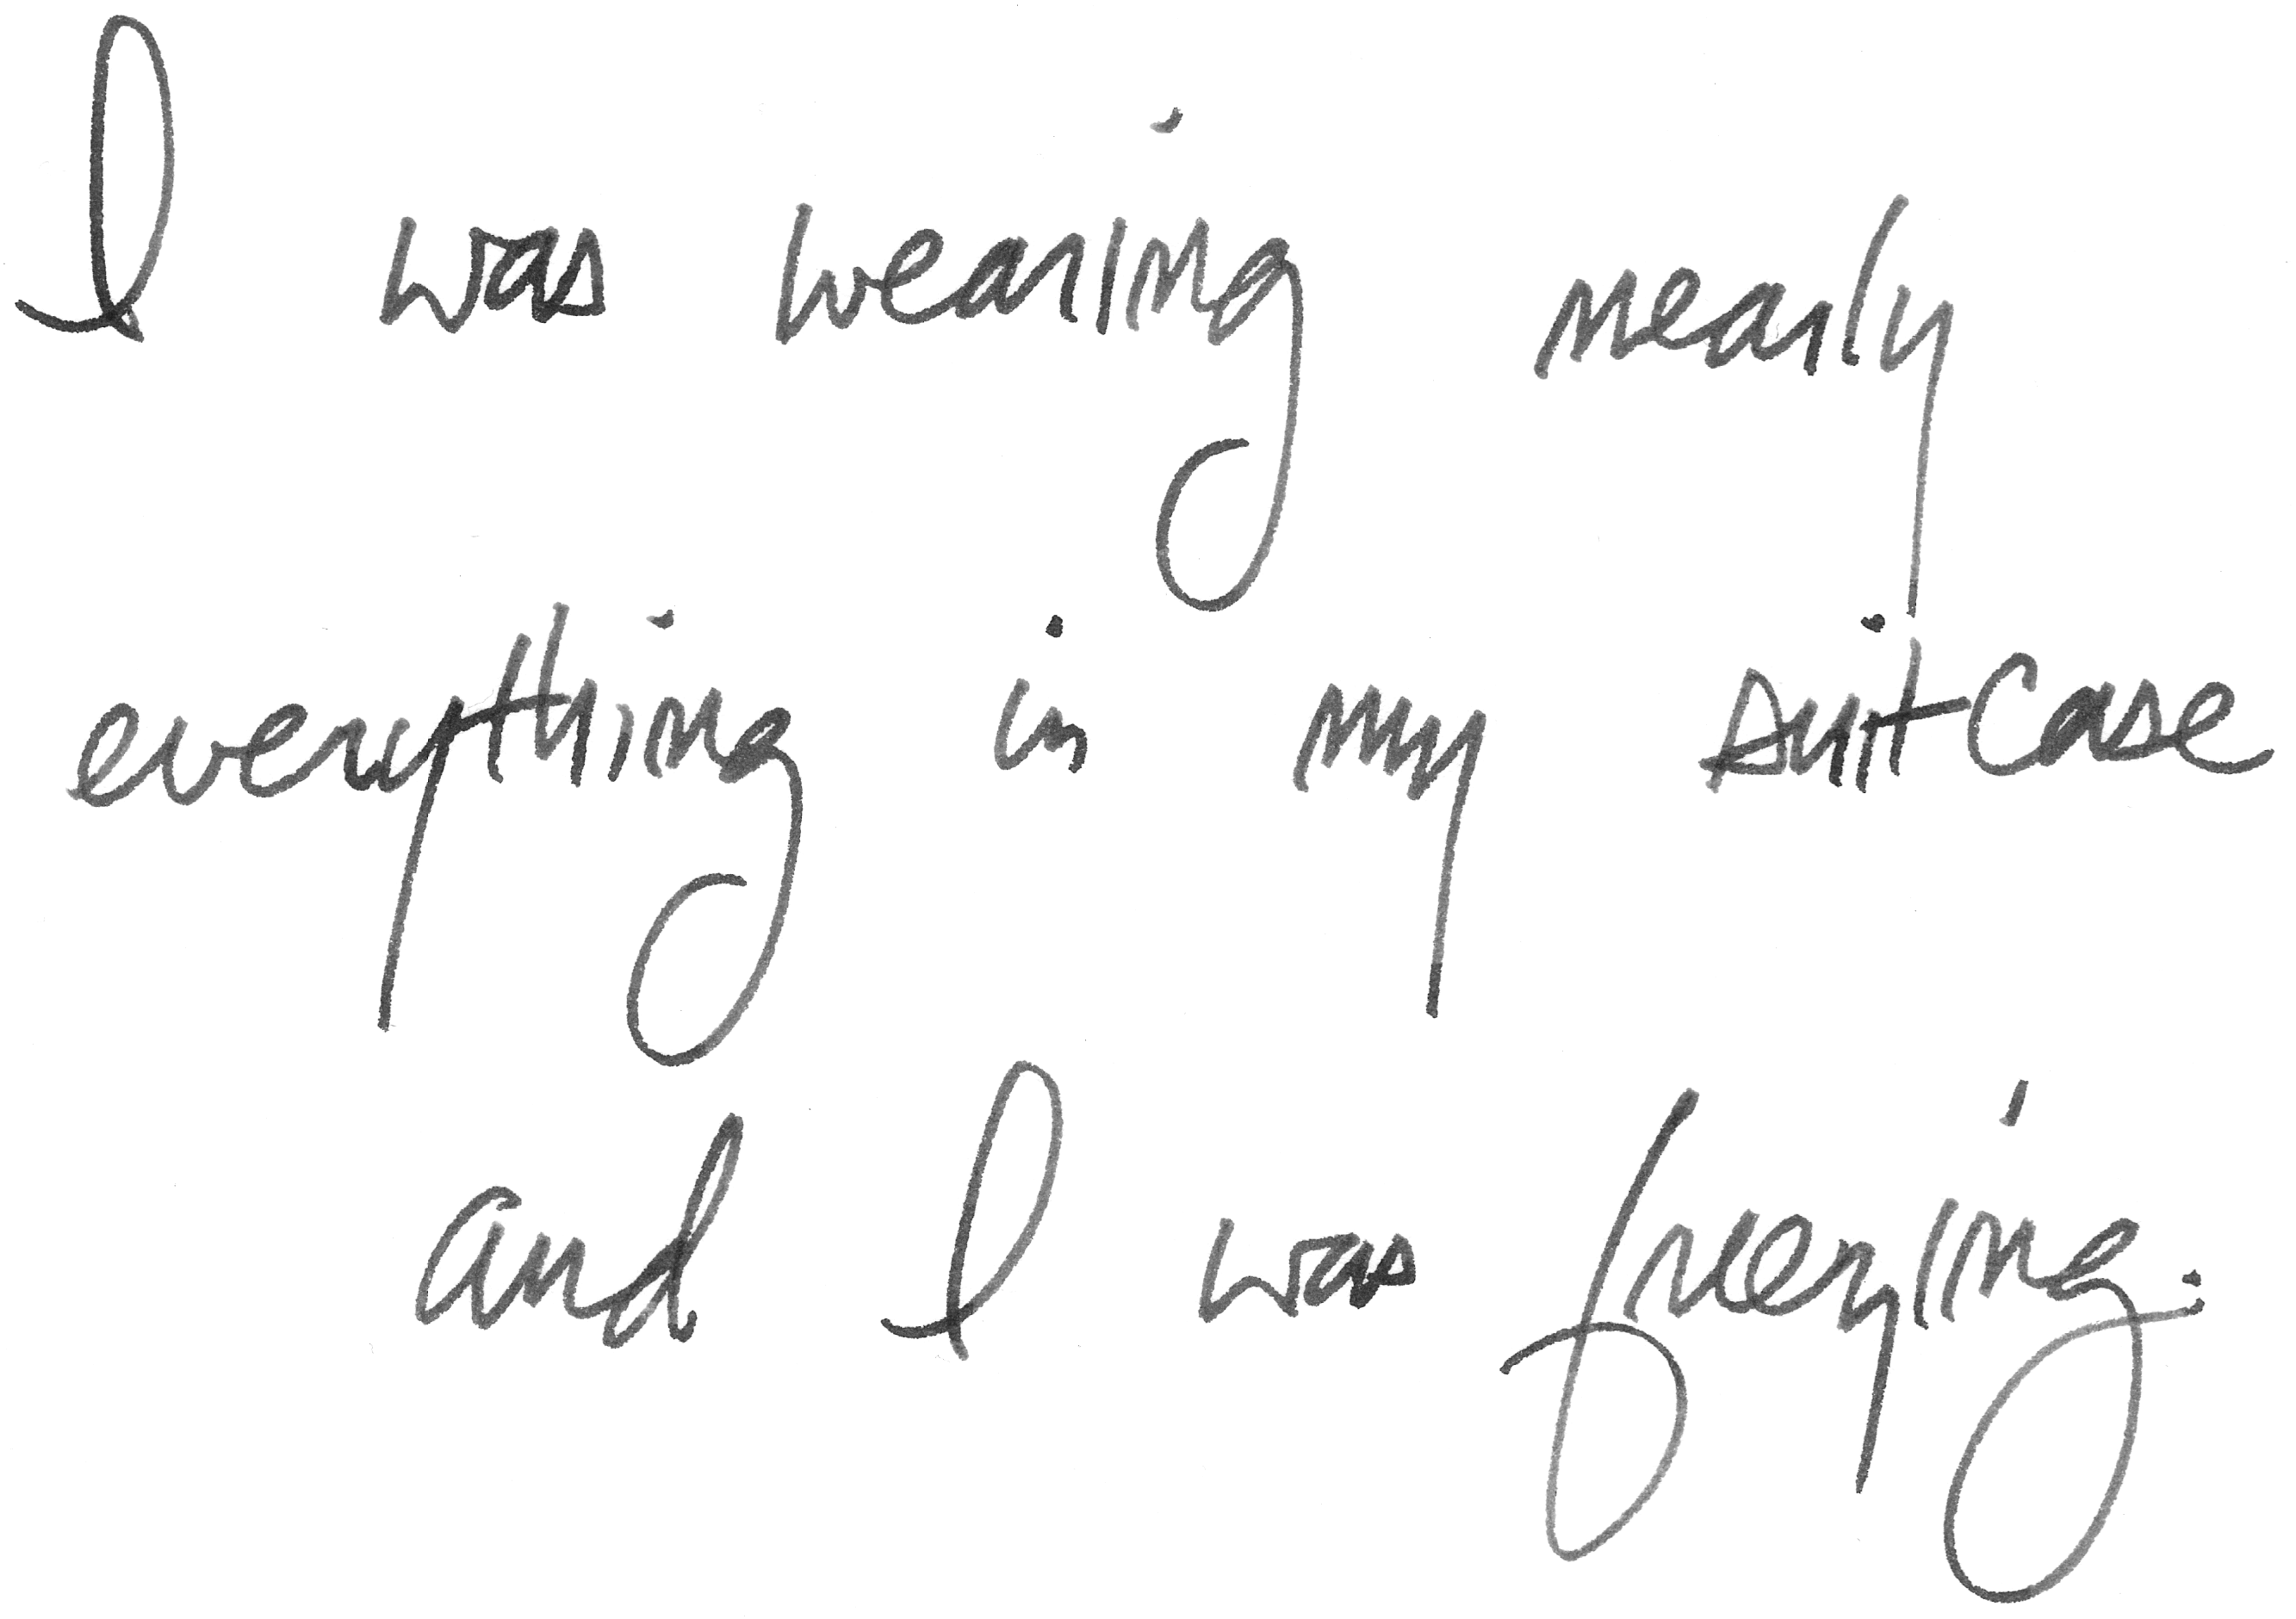 Handwritten pullquote: I was wearing nearly everything in my suitcase and I was freezing